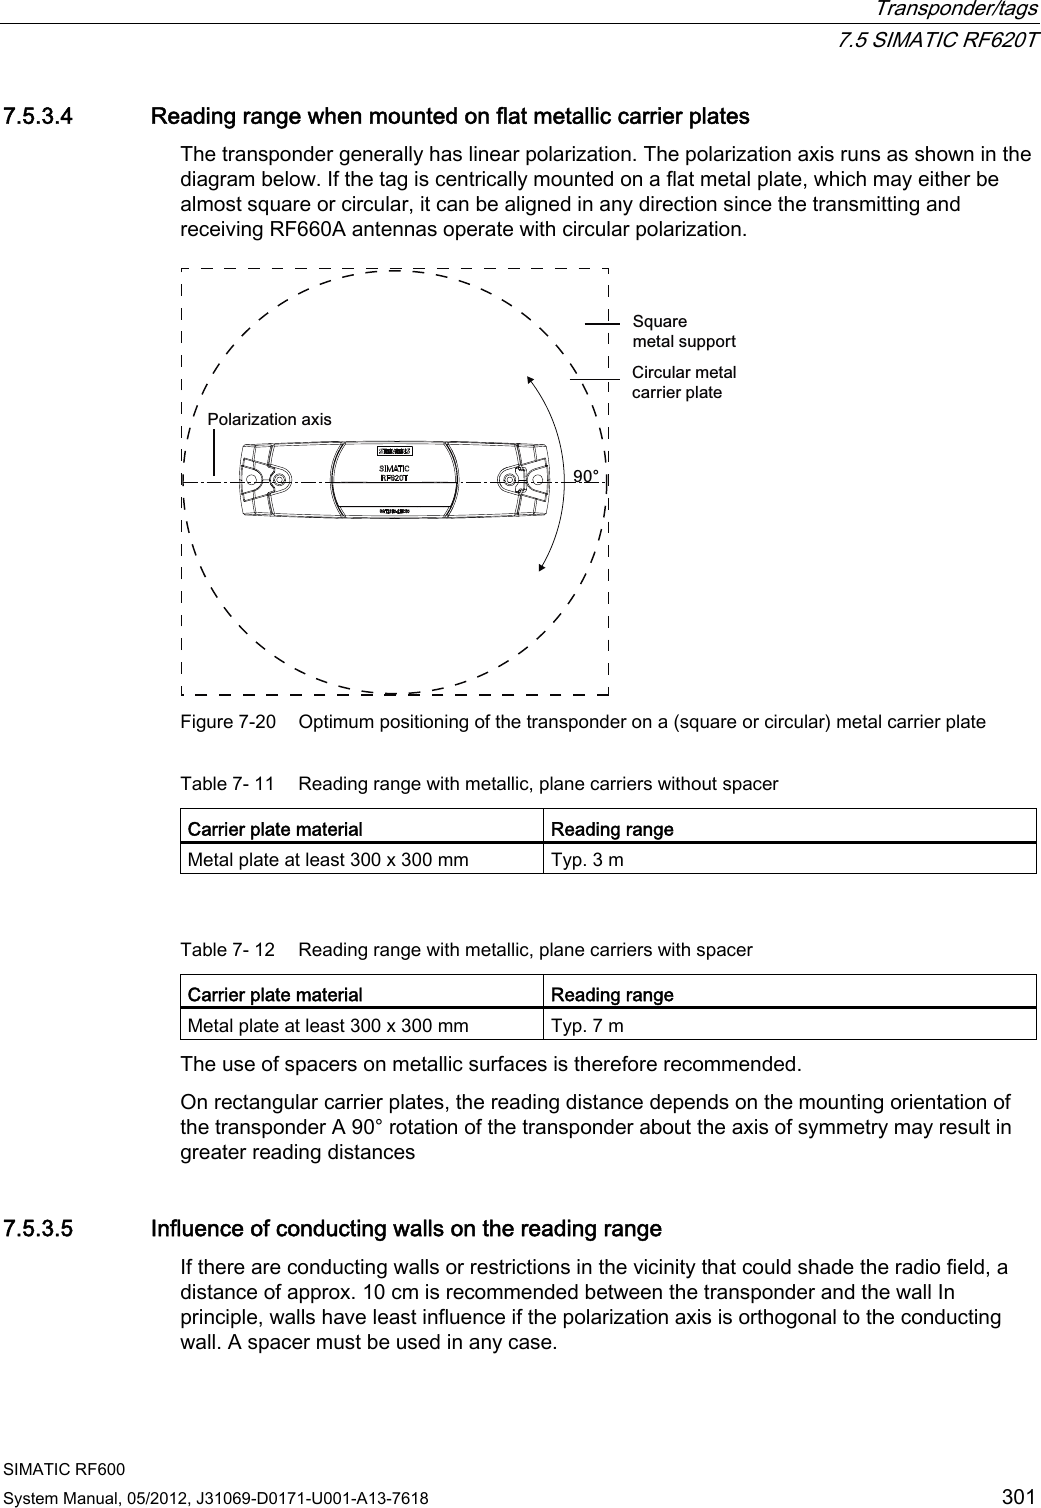  Transponder/tags  7.5 SIMATIC RF620T SIMATIC RF600 System Manual, 05/2012, J31069-D0171-U001-A13-7618  301 7.5.3.4 Reading range when mounted on flat metallic carrier plates The transponder generally has linear polarization. The polarization axis runs as shown in the diagram below. If the tag is centrically mounted on a flat metal plate, which may either be almost square or circular, it can be aligned in any direction since the transmitting and receiving RF660A antennas operate with circular polarization. 3RODUL]DWLRQD[LV6TXDUHPHWDOVXSSRUW&amp;LUFXODUPHWDOFDUULHUSODWHr Figure 7-20  Optimum positioning of the transponder on a (square or circular) metal carrier plate Table 7- 11  Reading range with metallic, plane carriers without spacer Carrier plate material  Reading range  Metal plate at least 300 x 300 mm  Typ. 3 m  Table 7- 12  Reading range with metallic, plane carriers with spacer Carrier plate material  Reading range  Metal plate at least 300 x 300 mm  Typ. 7 m The use of spacers on metallic surfaces is therefore recommended. On rectangular carrier plates, the reading distance depends on the mounting orientation of the transponder A 90° rotation of the transponder about the axis of symmetry may result in greater reading distances  7.5.3.5 Influence of conducting walls on the reading range If there are conducting walls or restrictions in the vicinity that could shade the radio field, a distance of approx. 10 cm is recommended between the transponder and the wall In principle, walls have least influence if the polarization axis is orthogonal to the conducting wall. A spacer must be used in any case. 